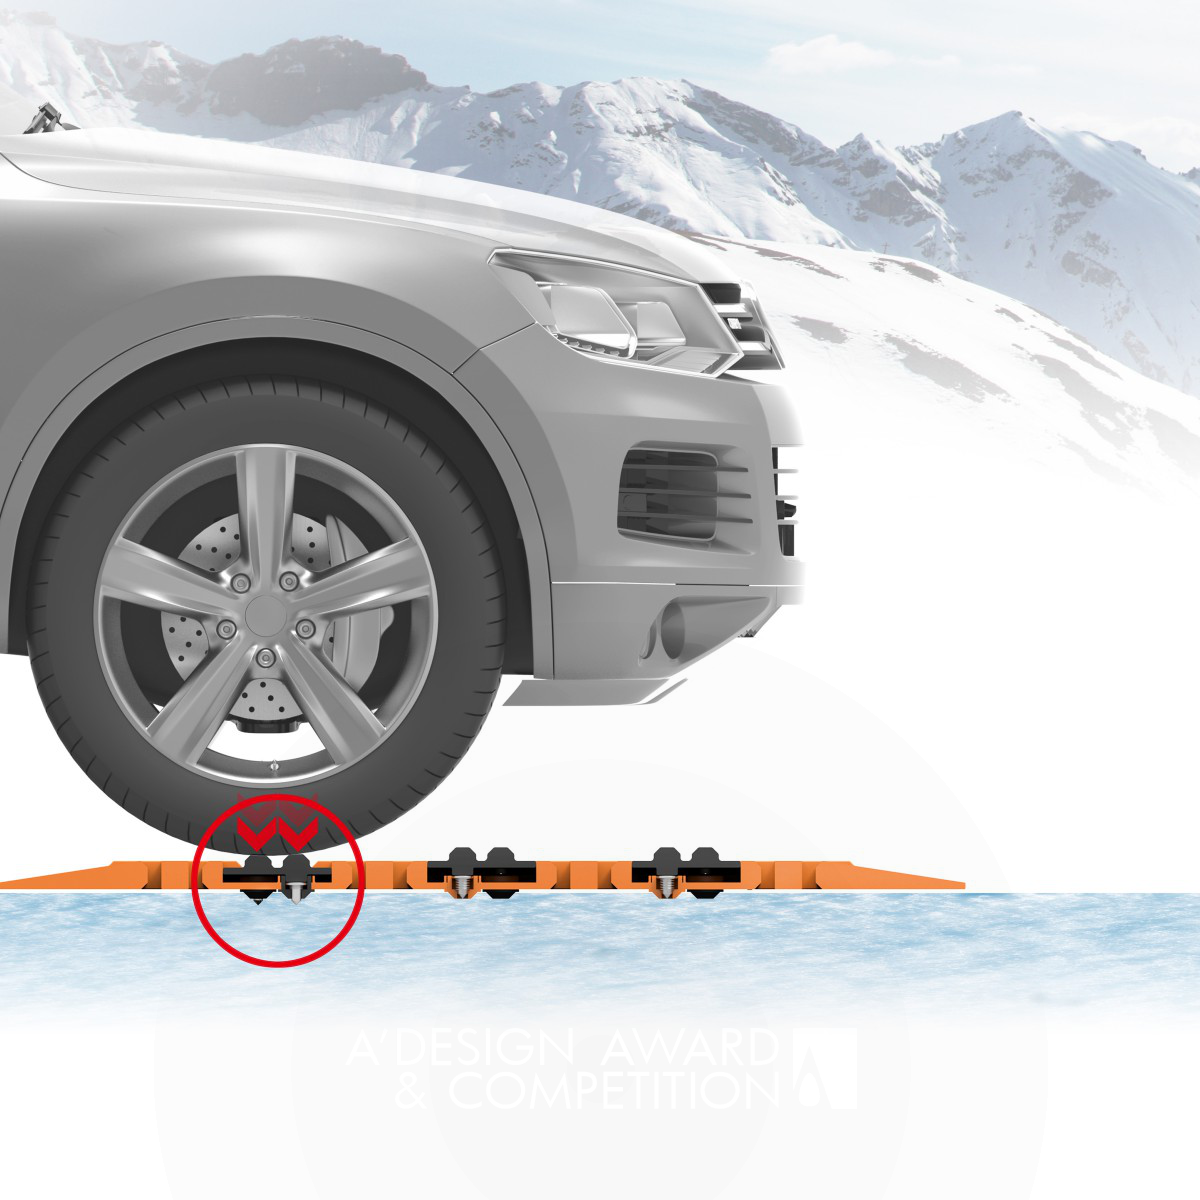 Portable TPR Car-rescue-track Help drivers safely drive over